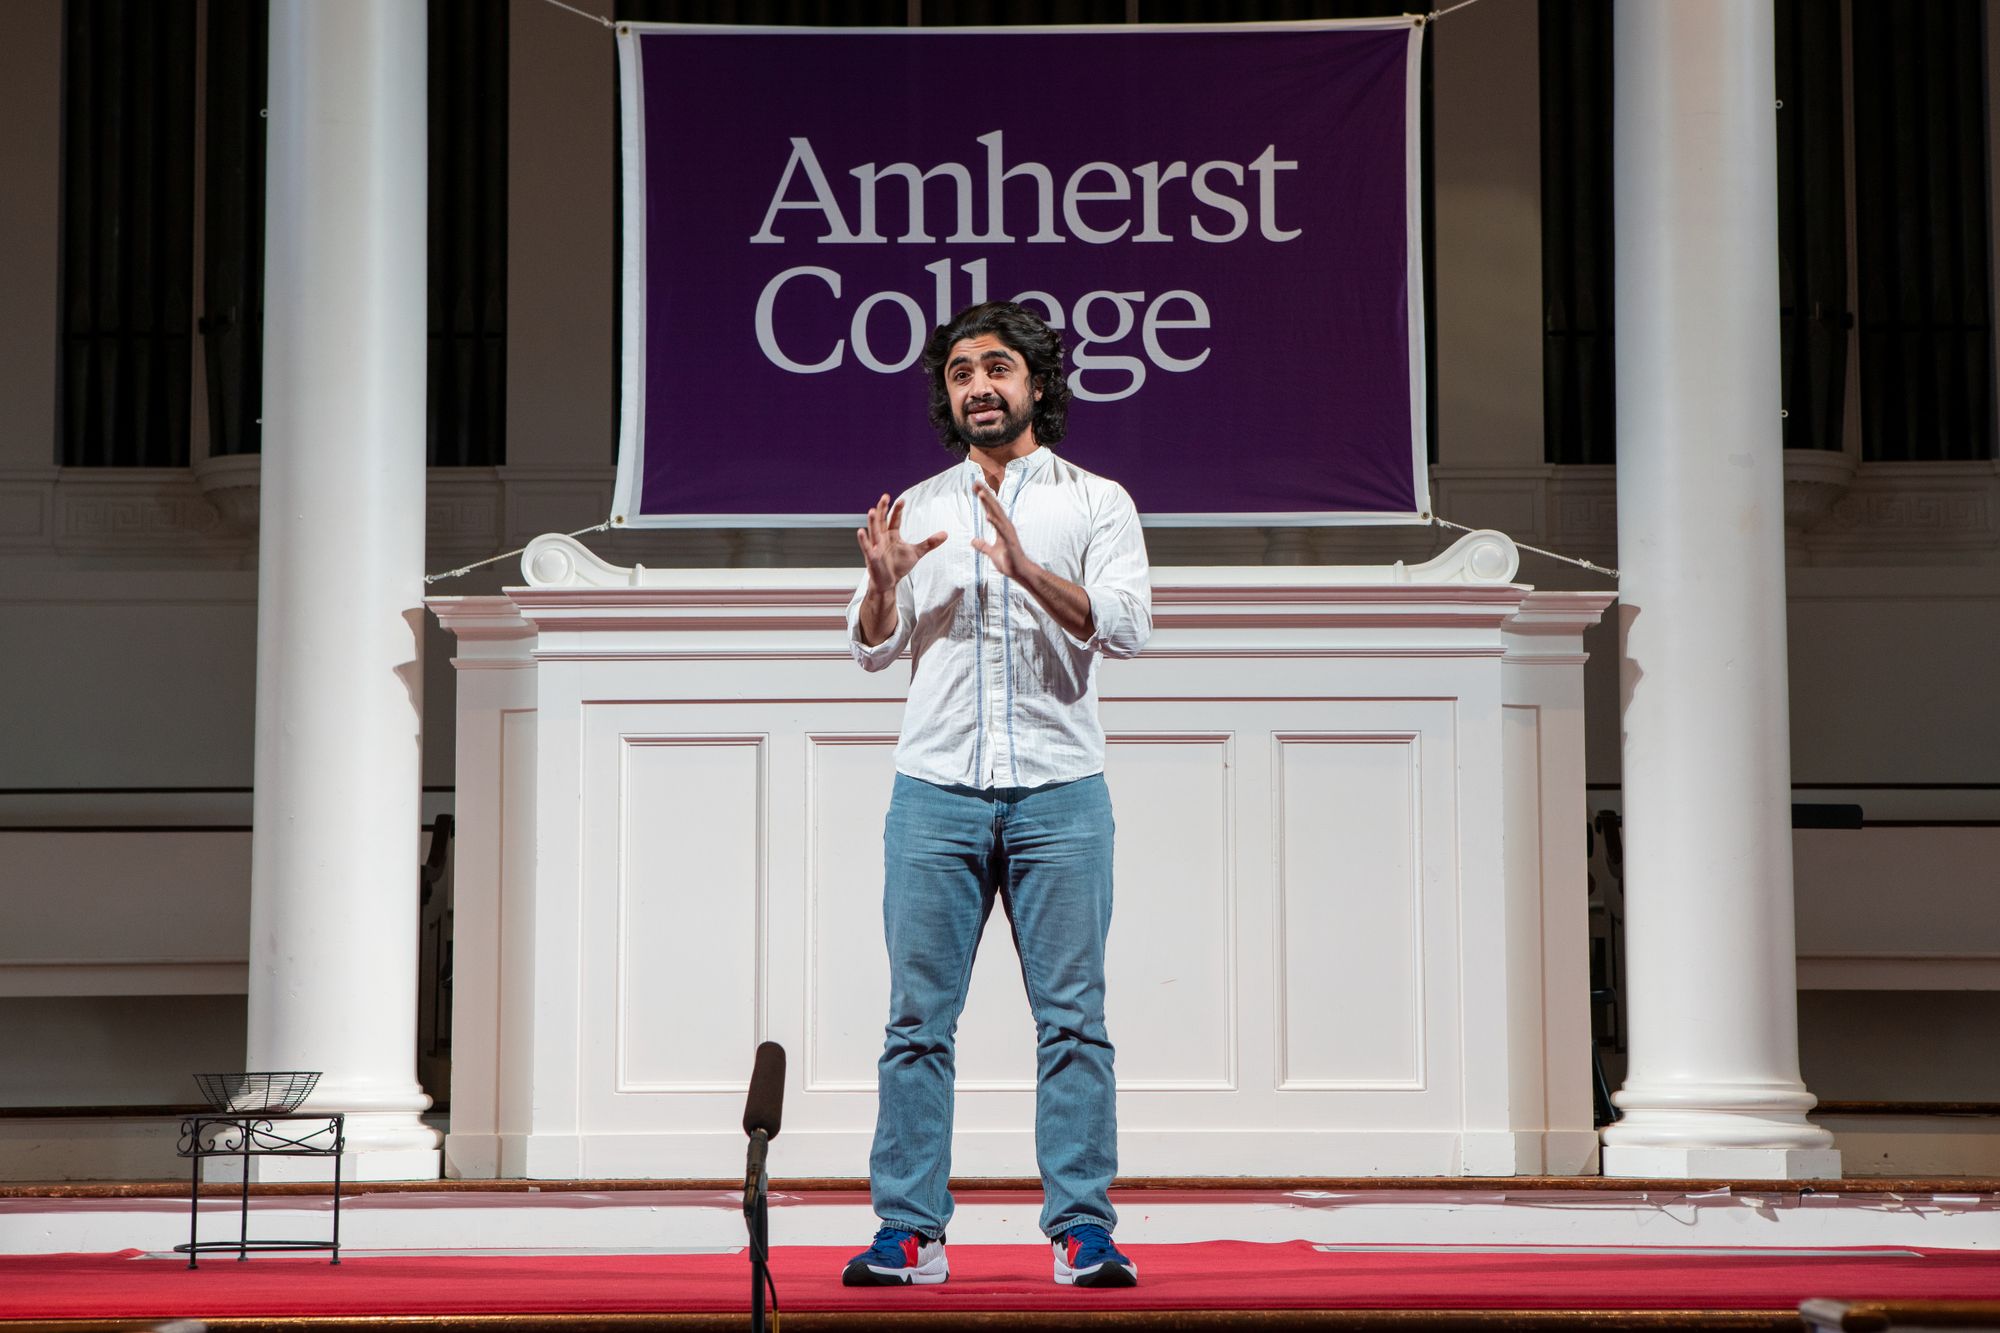 The image depicts Daniyal Ahmad Khan speaking and using hand gestures onstage at Johnson Chapel.